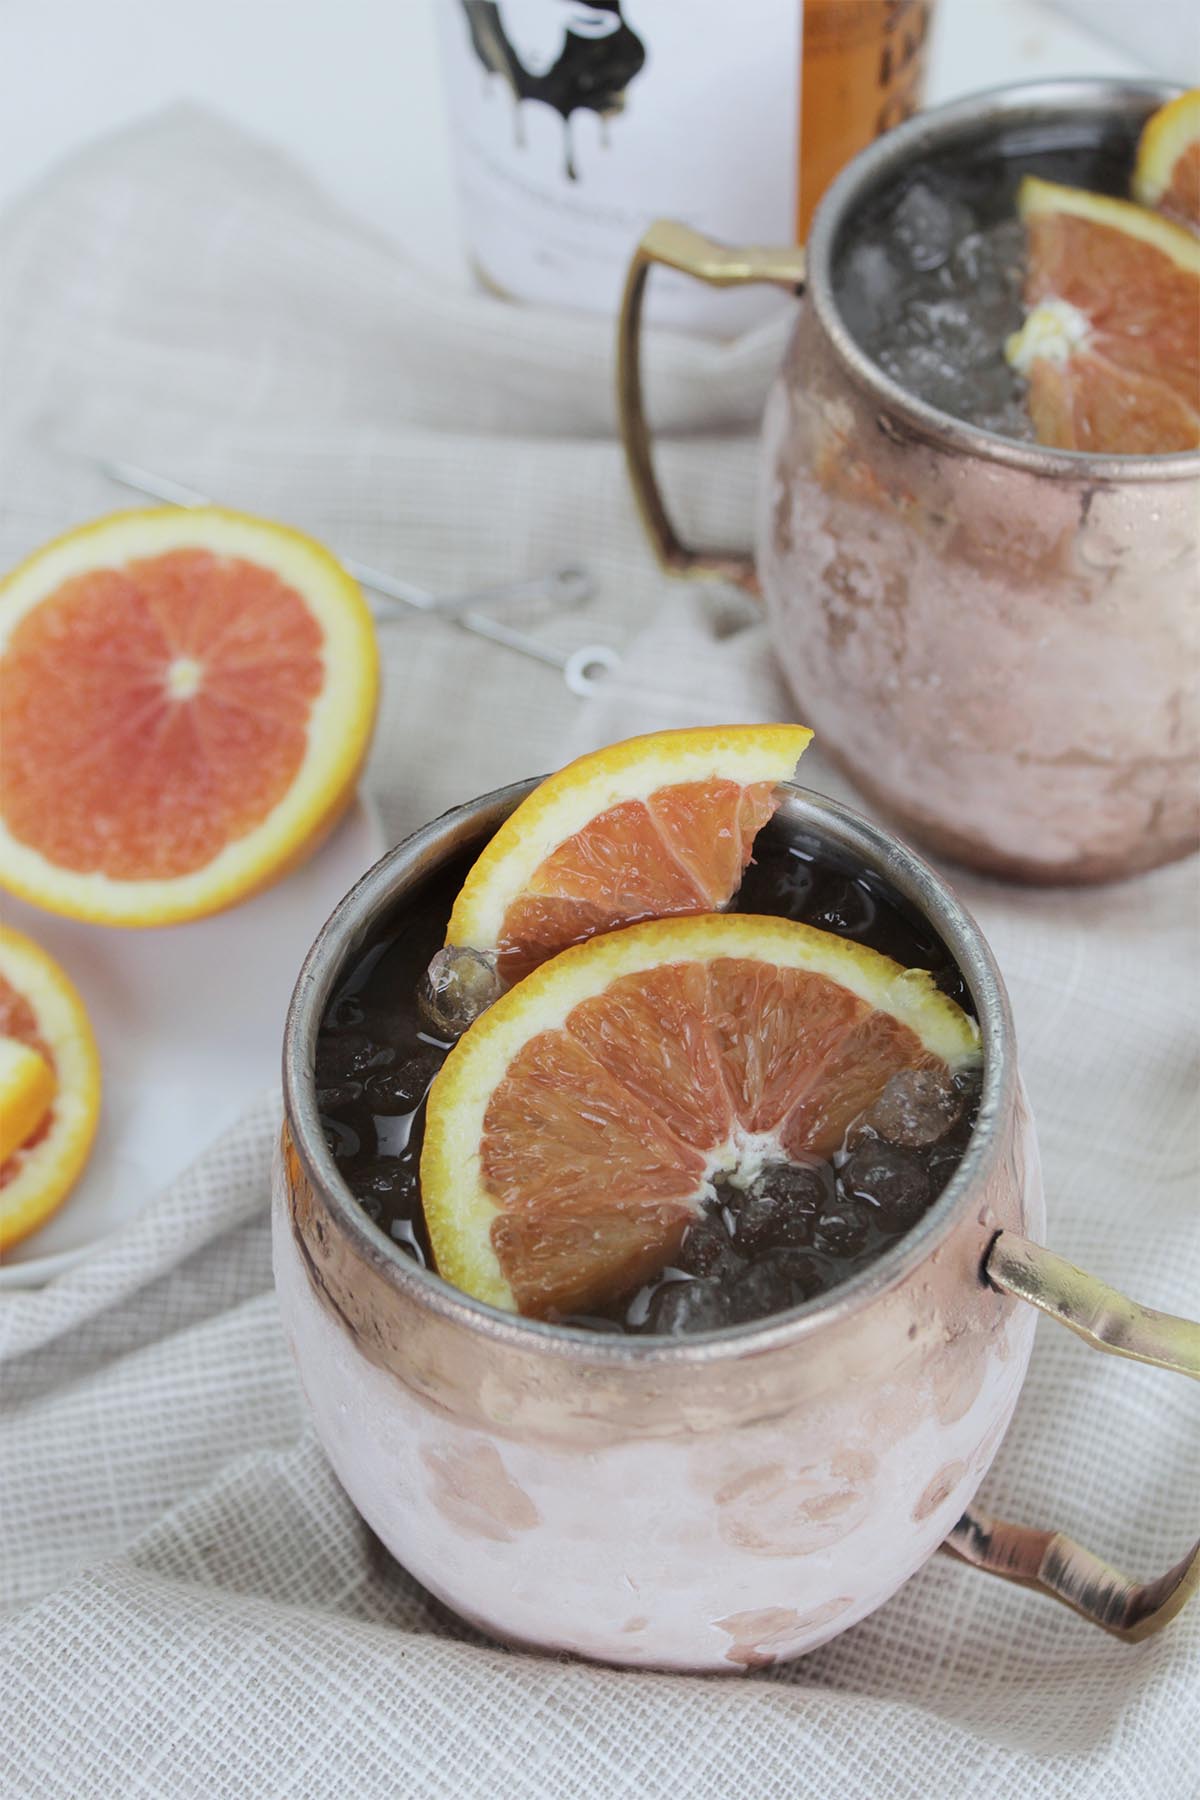 moscow mules in copper mug with orange slices.